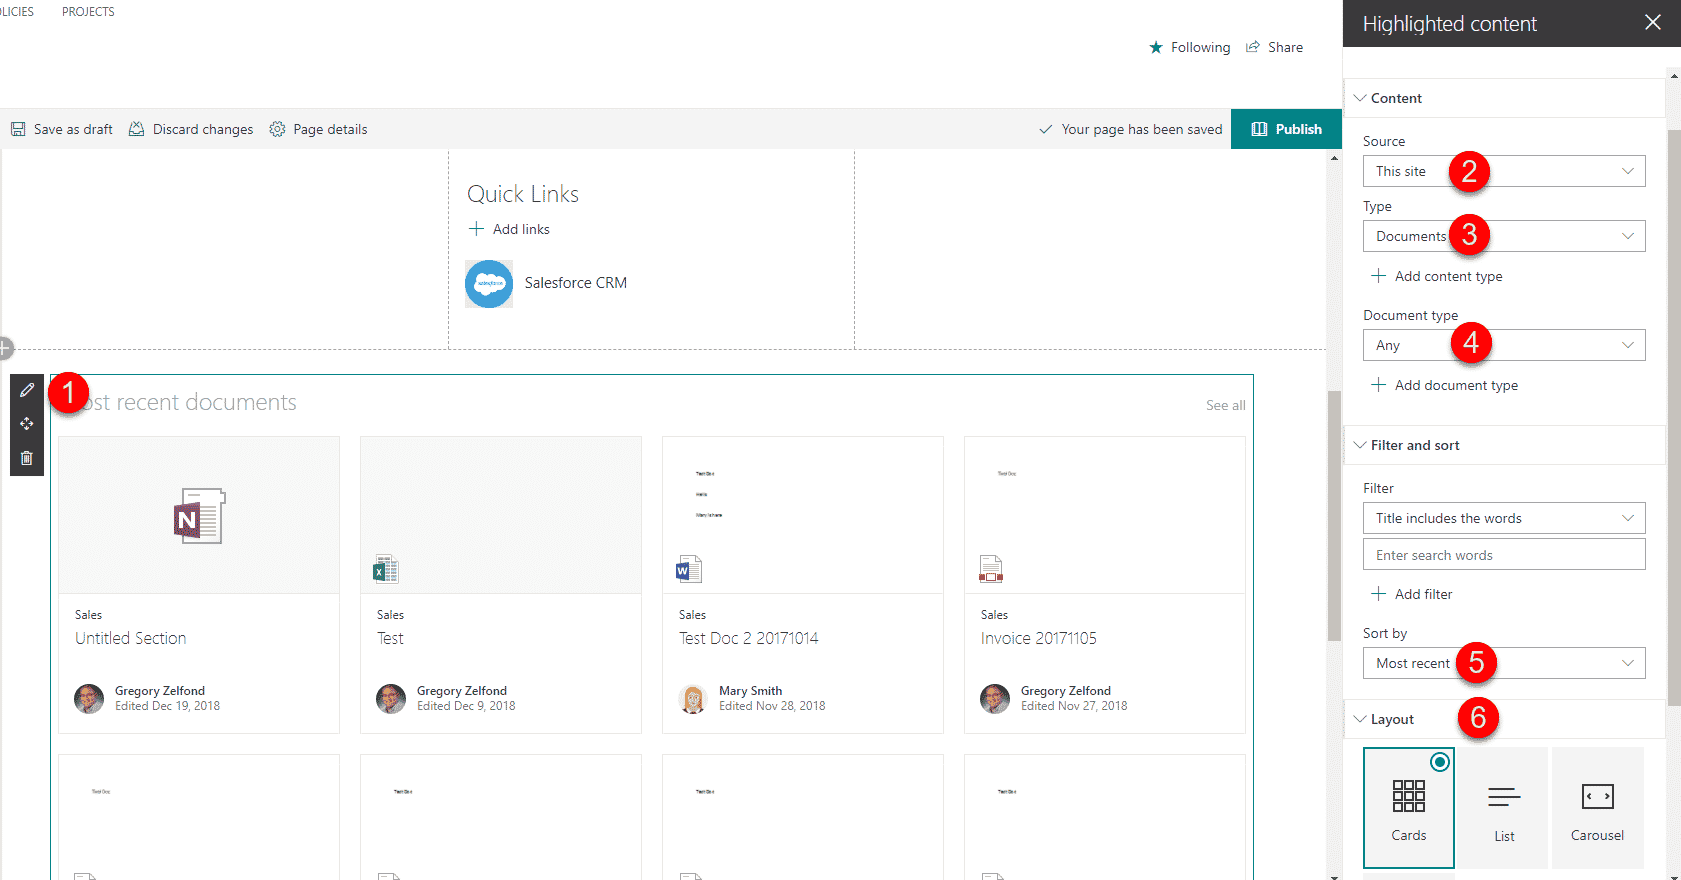 recently modified documents on a SharePoint site